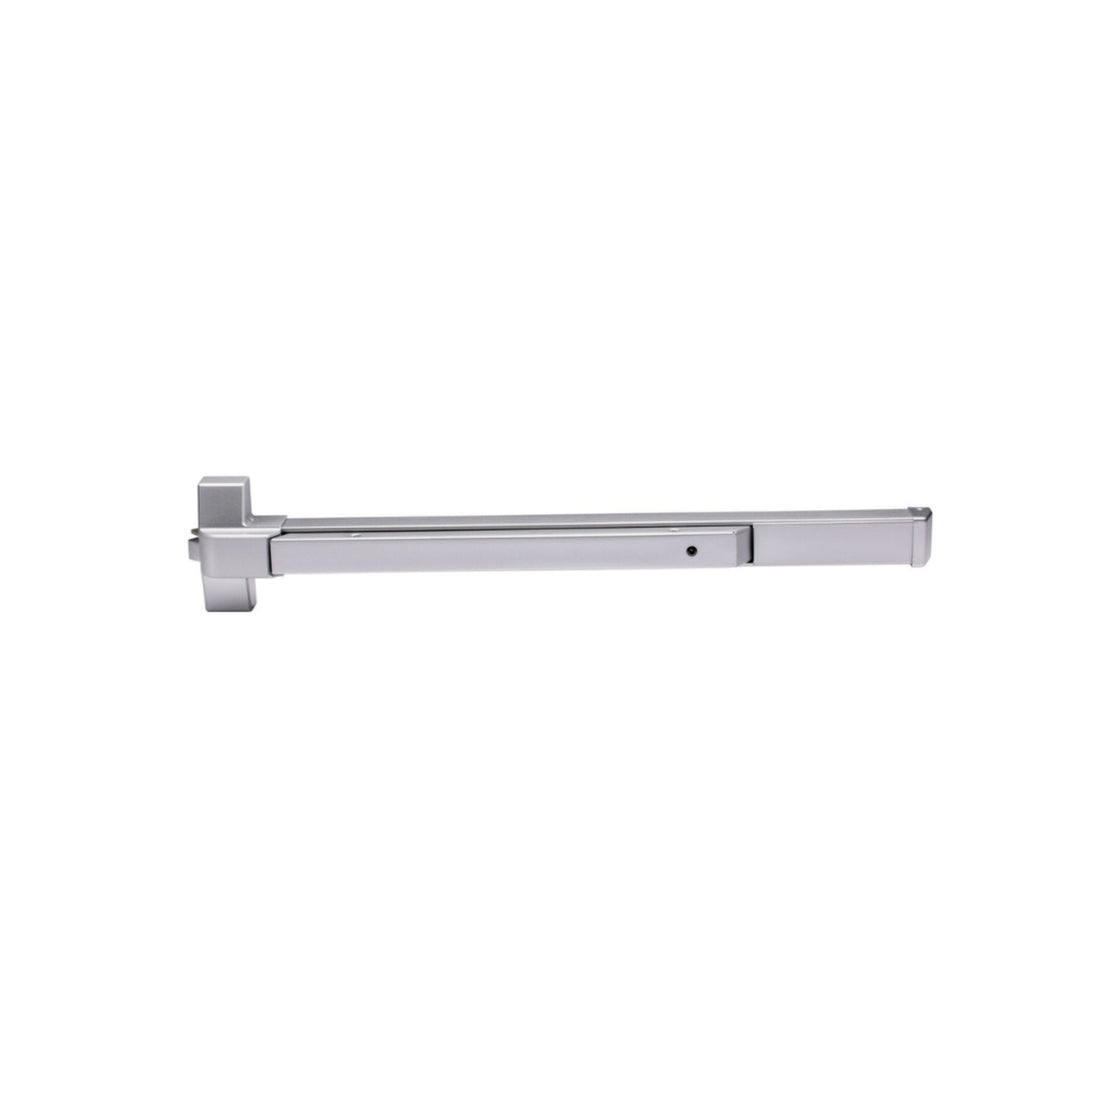 EDSV Series Grade 2 Commercial 36 in Fire Rated Surface Vertical Rod Touch Bar Exit Device